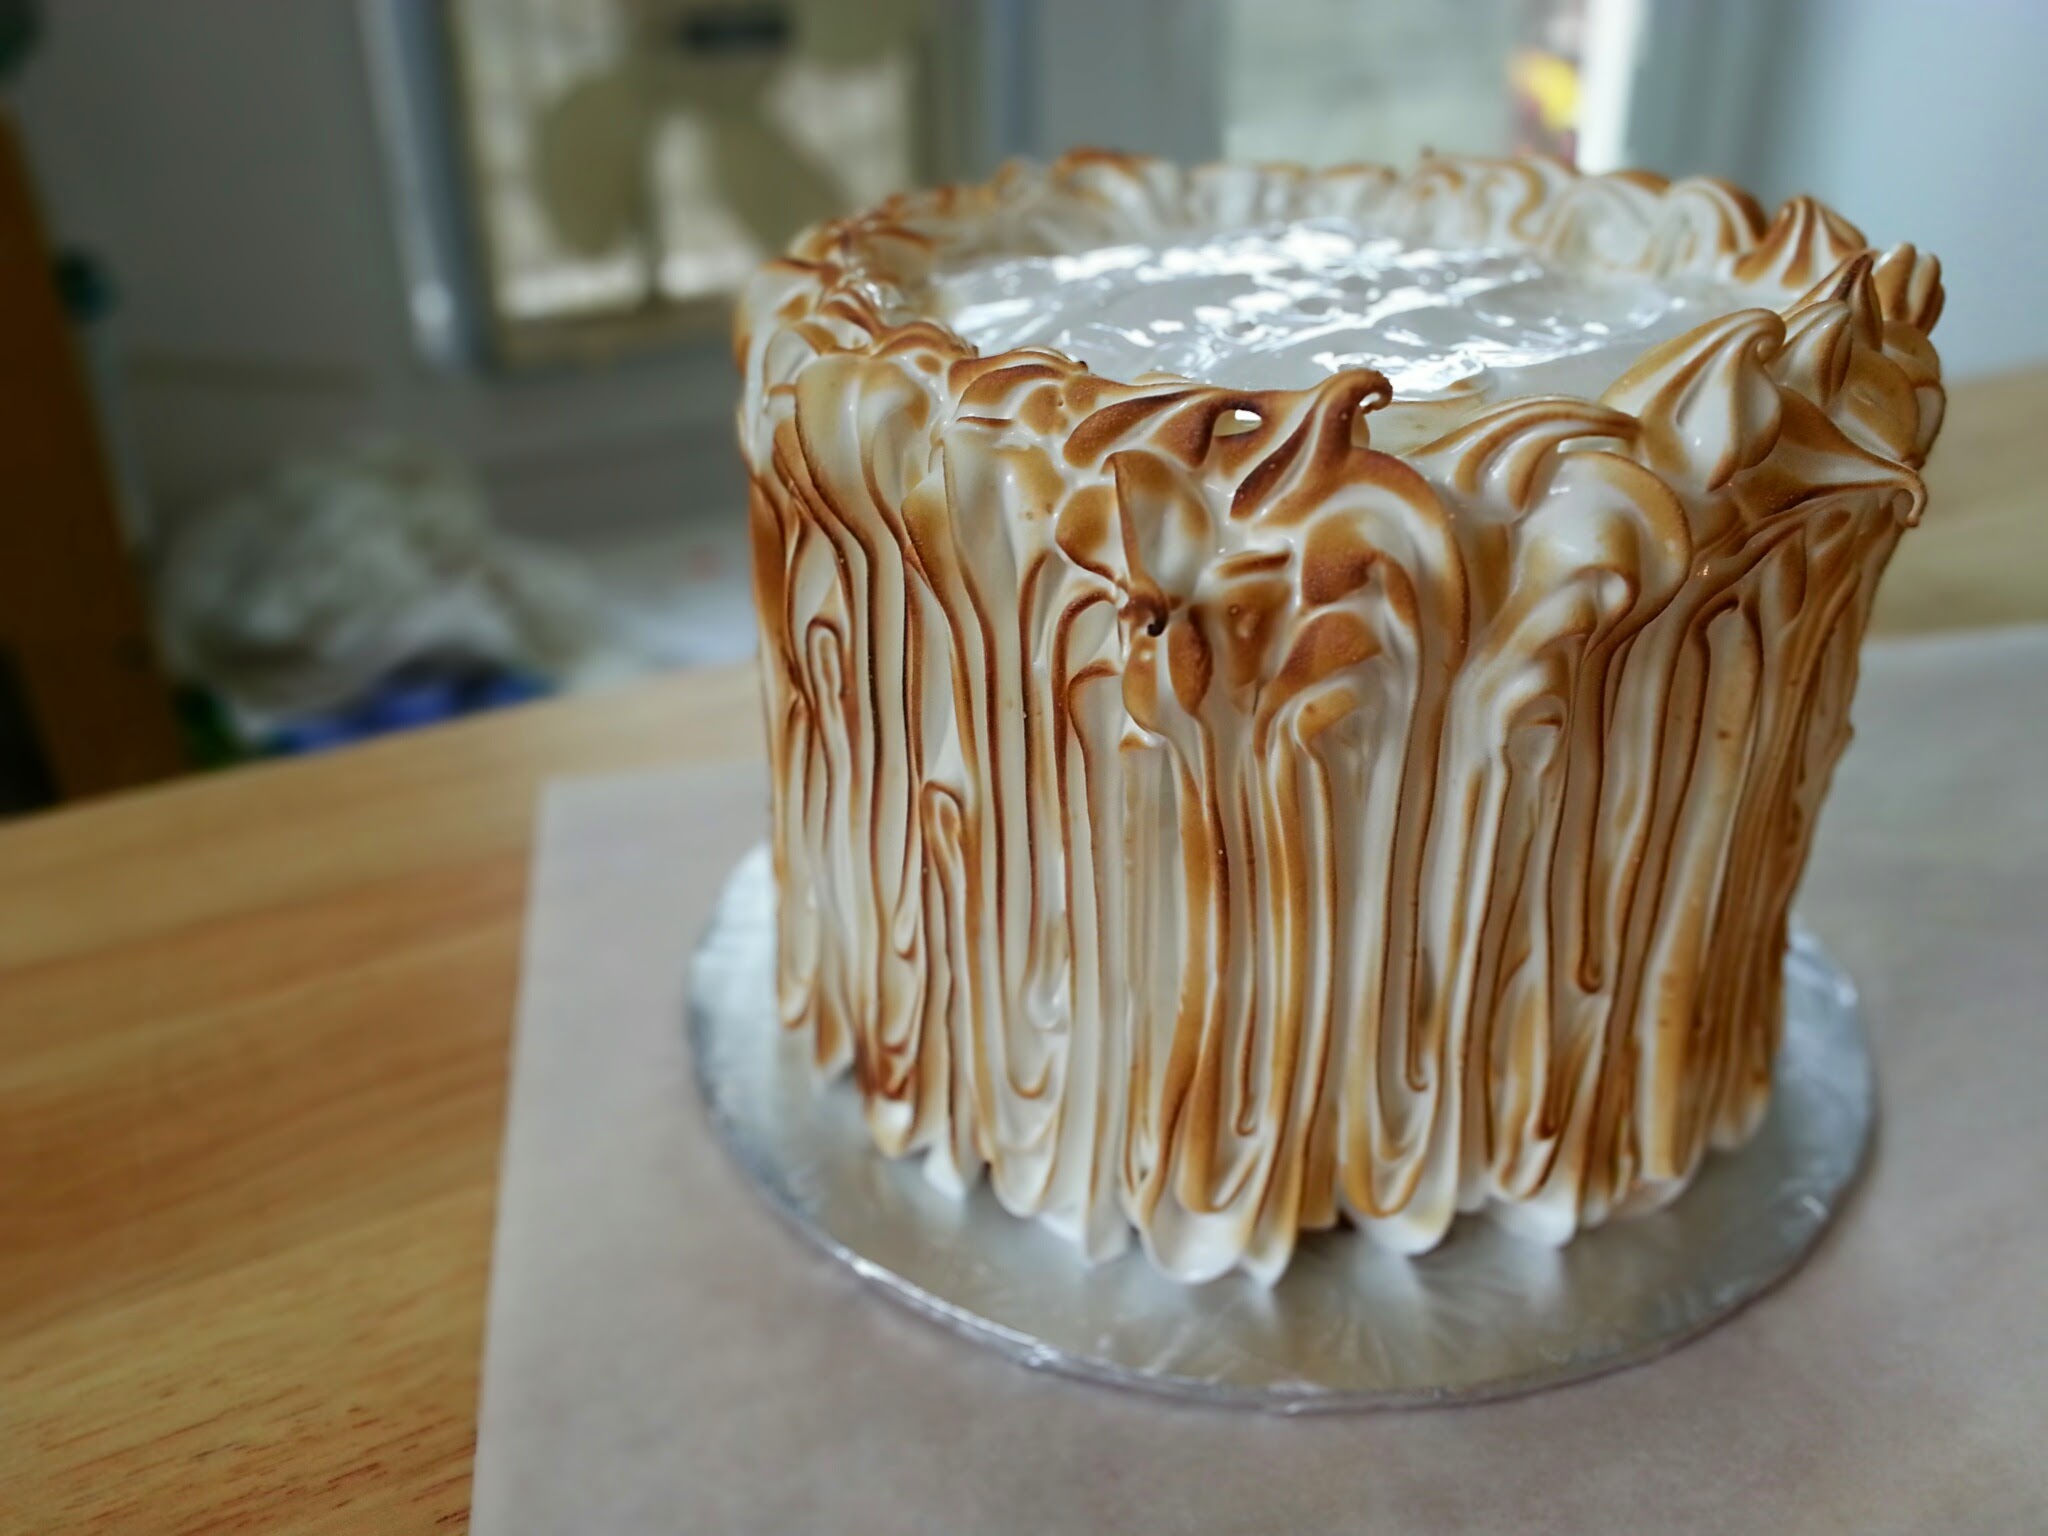 Toasted marshmallow frosting